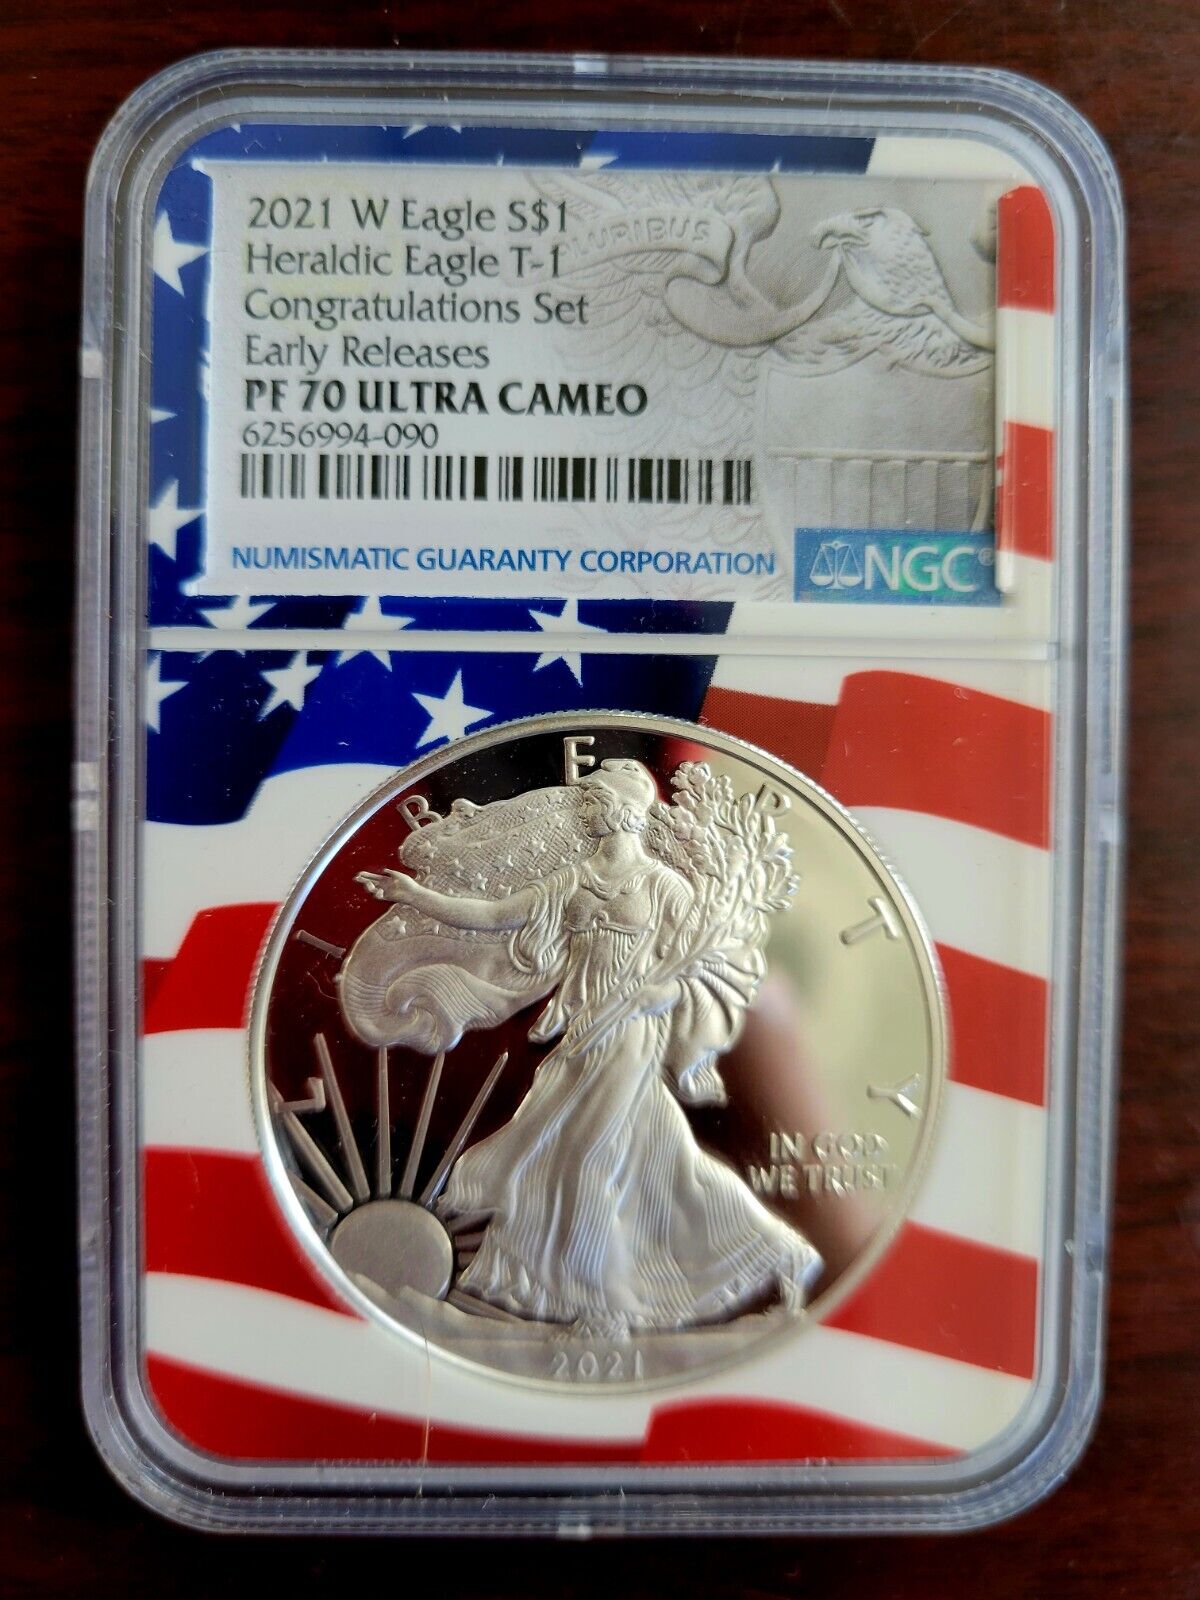 2021 W Silver Proof Eagle T-1 NGC PF70 Congratulations Set Early Release Cameo